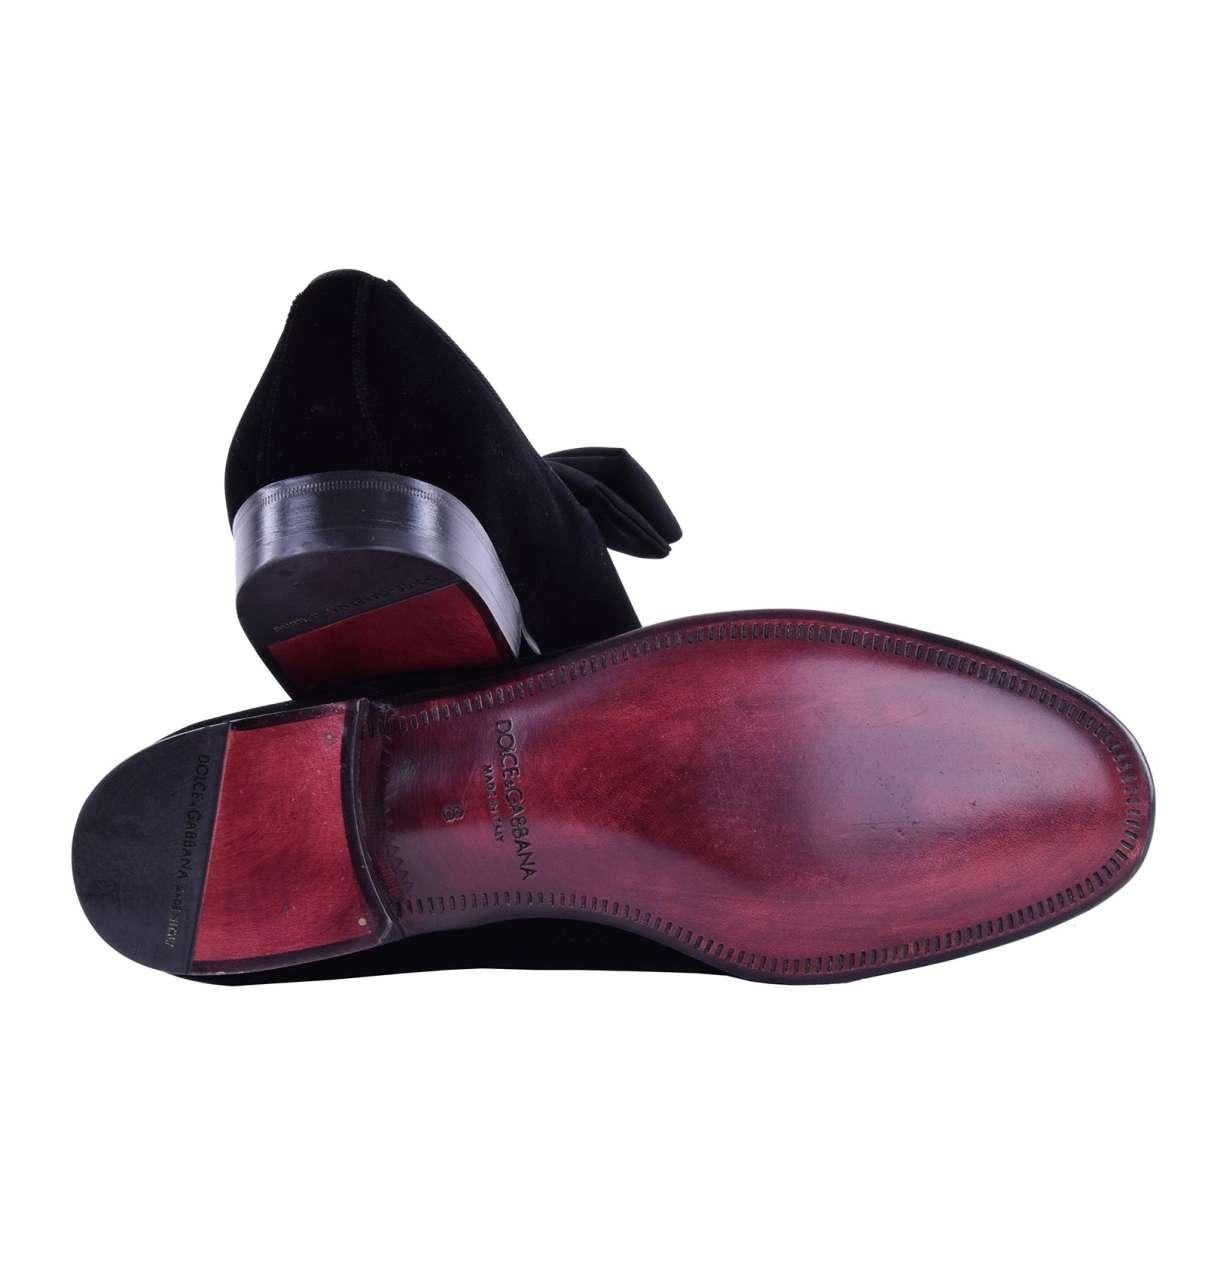 - Velour slip-on shoes MILANO with sewn silk bow tie by DOLCE & GABBANA Black Label - MADE IN ITALY - New with Box - Former RRP: EUR 545 - Model: CA6212-A4153-80999 - Material: 100% Velour (Cotton) - Sole: Leather - Color: Black - Blake construction